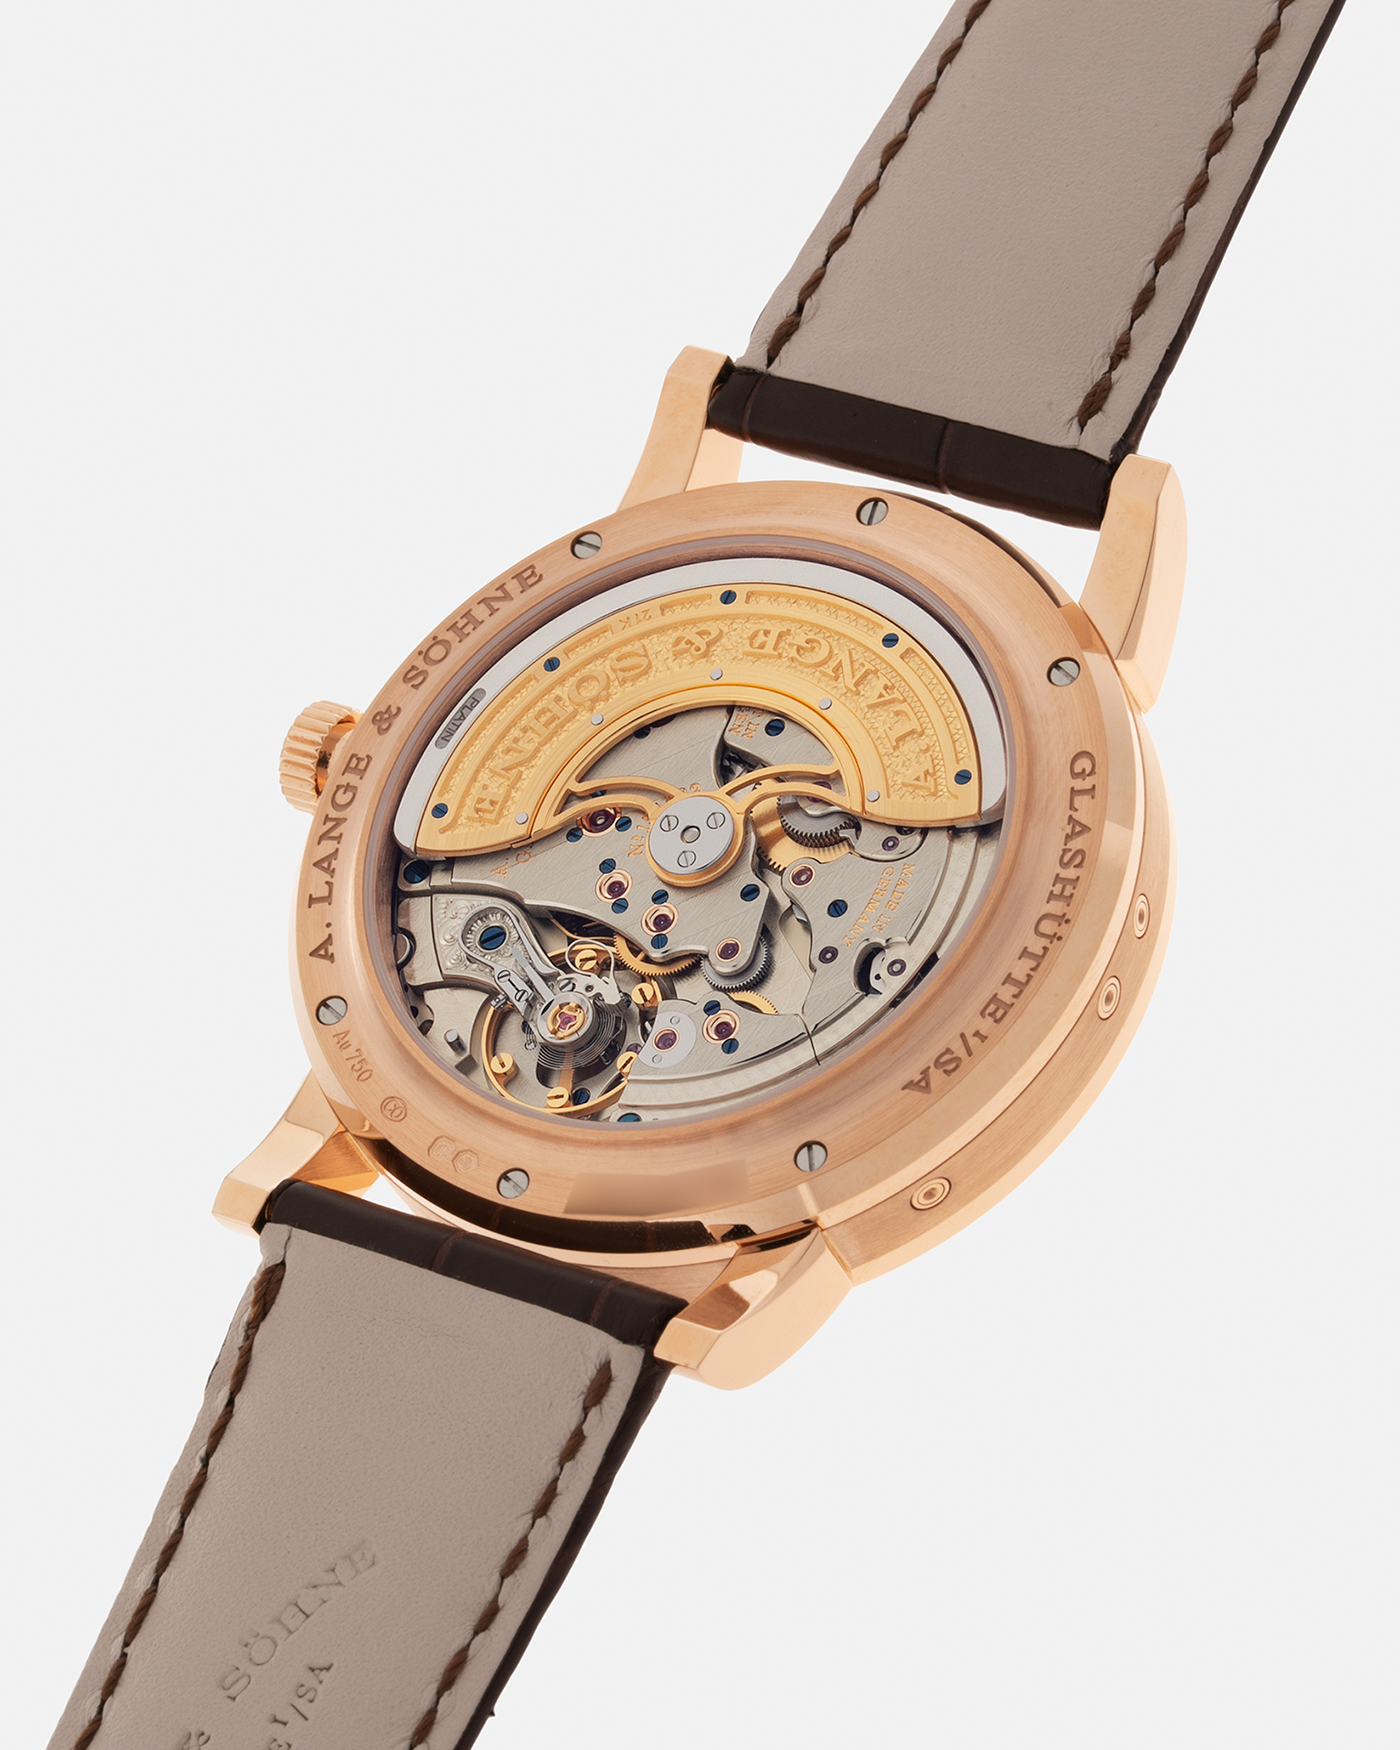 Brand: A. Lange & Söhne Year: 2022 Model: Lange 1 Perpetual Calendar Reference Number: 345.033 E Material: 18-carat Rose Gold Case Movement: A. Lange & Söhne Cal. L021.3, Self-Winding Case Dimensions: 41.9mm x 12.1mm Lug Width: 22mm Strap: A. Lange & Söhne Dark Brown Alligator Strap with 18-carat Rose Gold Tang Buckle, and additional Generic Grey Nubuck Stitched Leather Strap